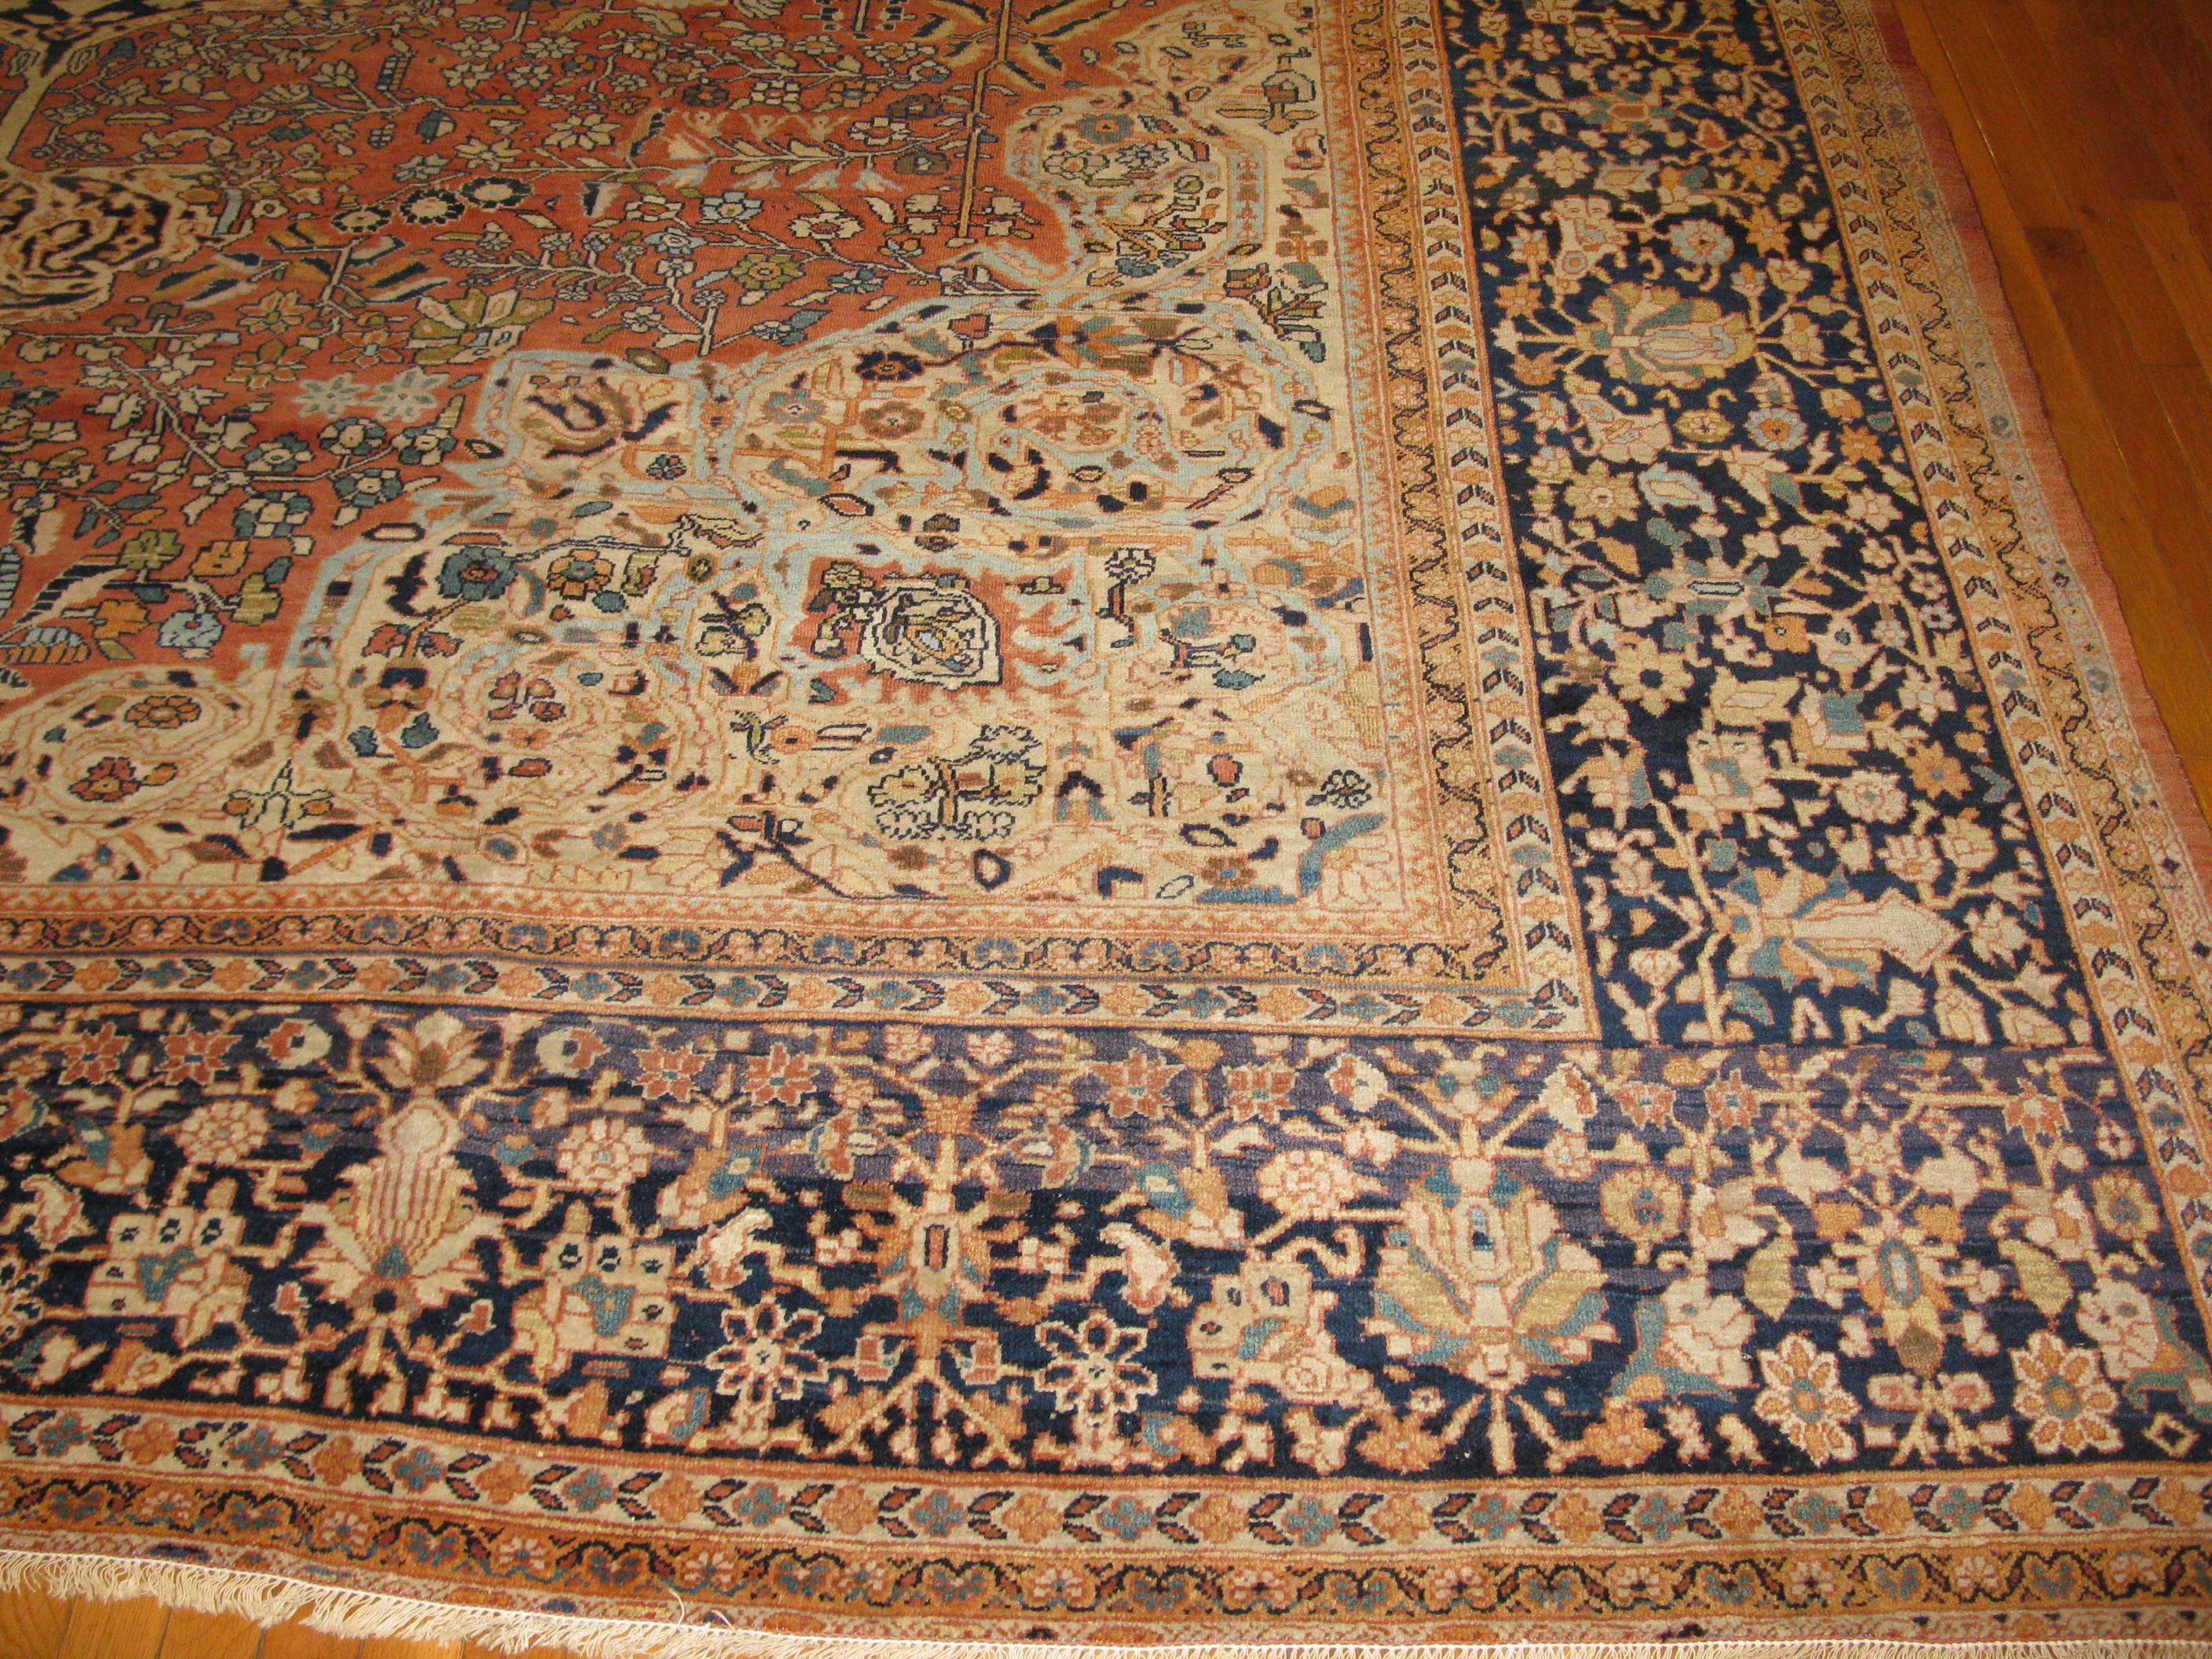 Late 19th Century Large Antique Hand-Knotted Persian Sarouk Farahan Rug